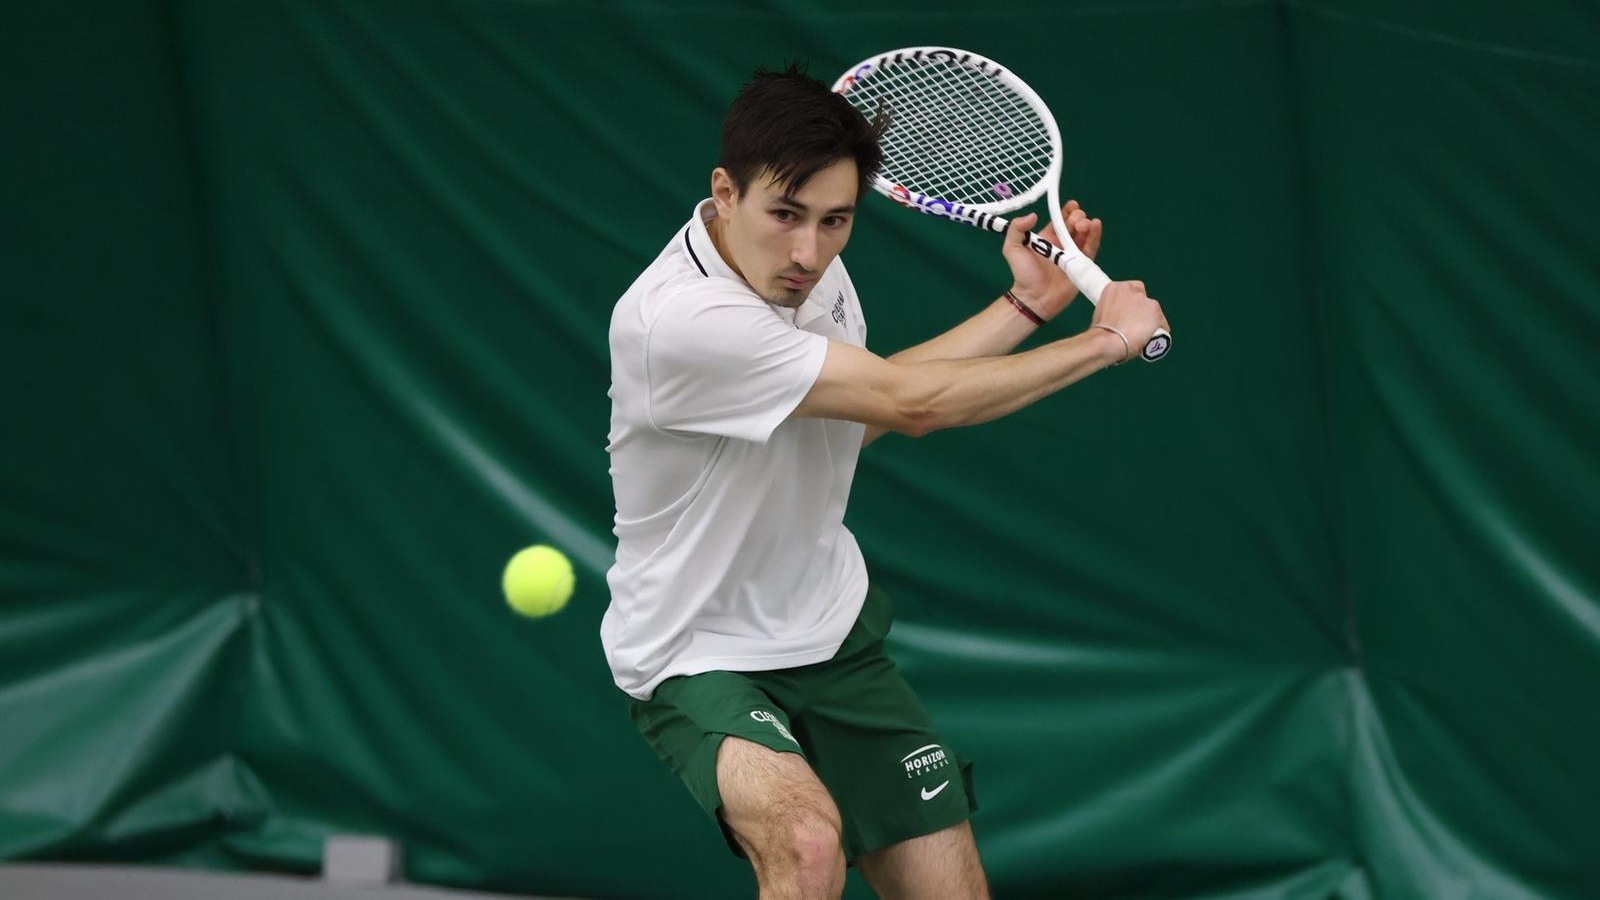 Cleveland State Men’s Tennis Improves To 6-0 In #HLTennis Play With 6-1 Win Against IUPUI